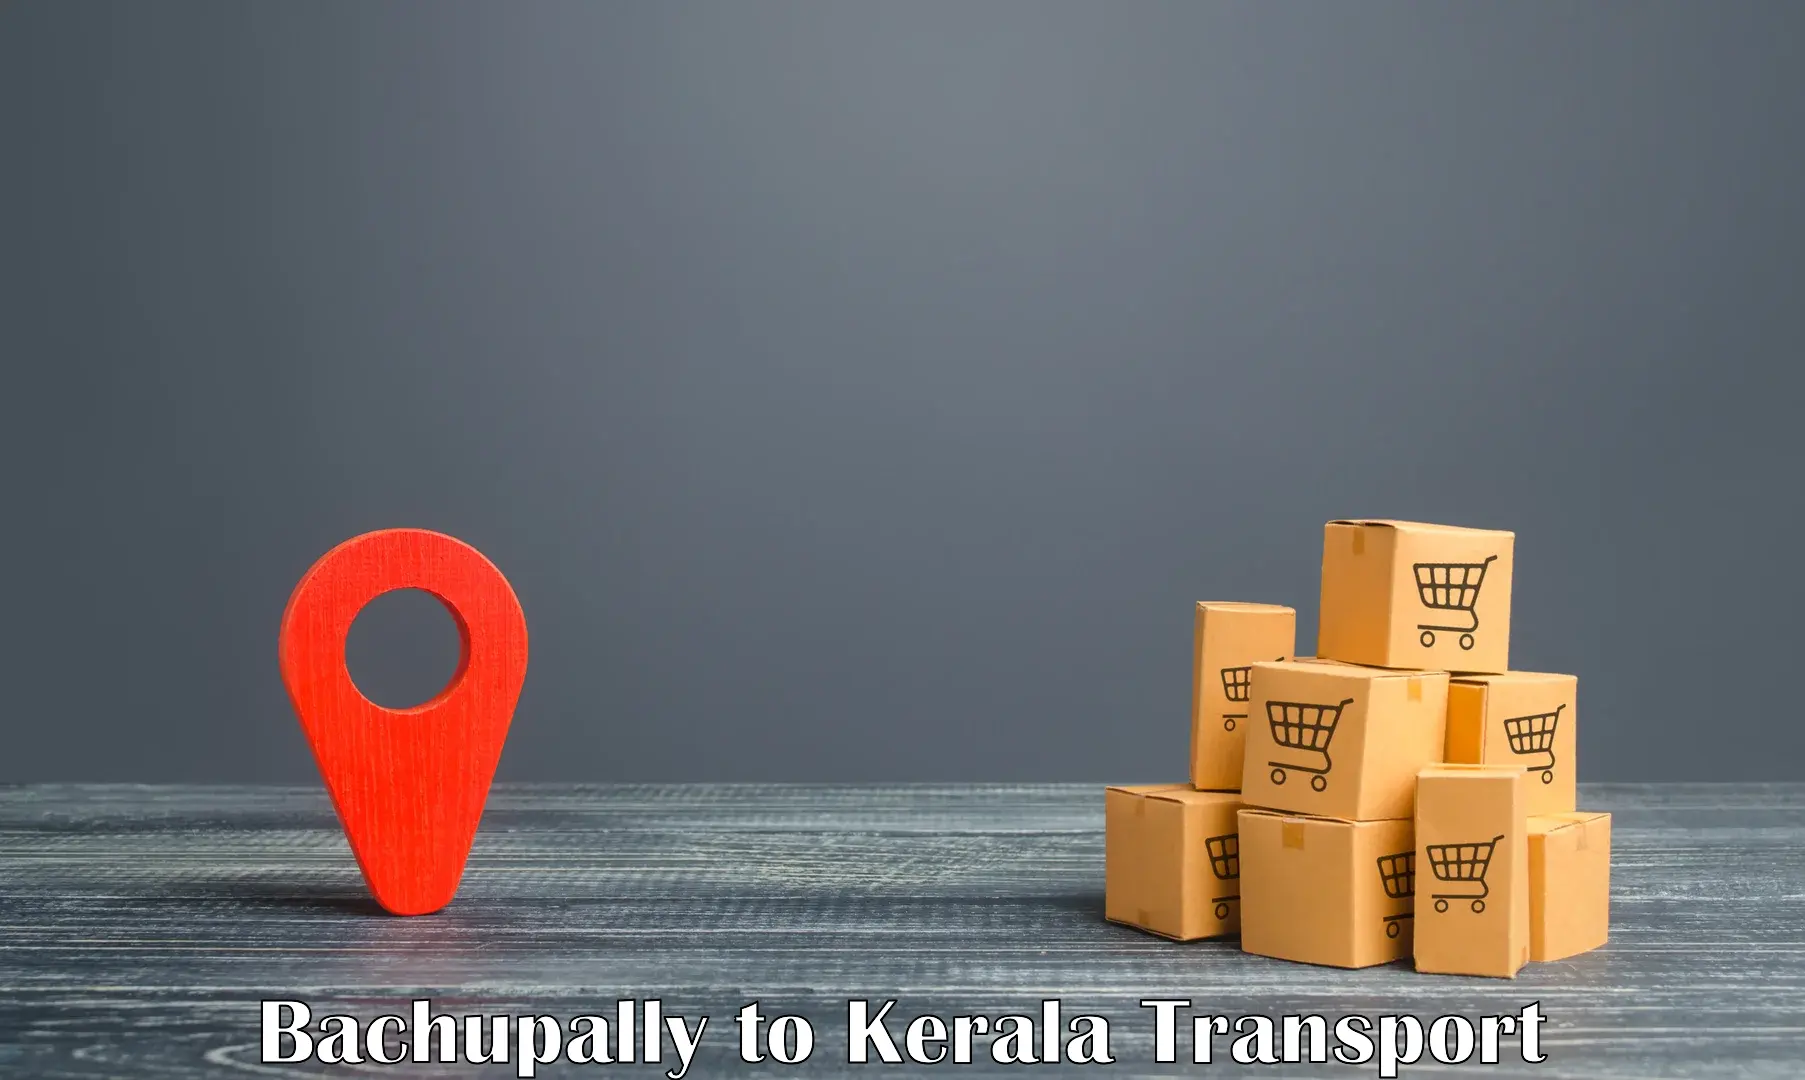 Commercial transport service Bachupally to Calicut